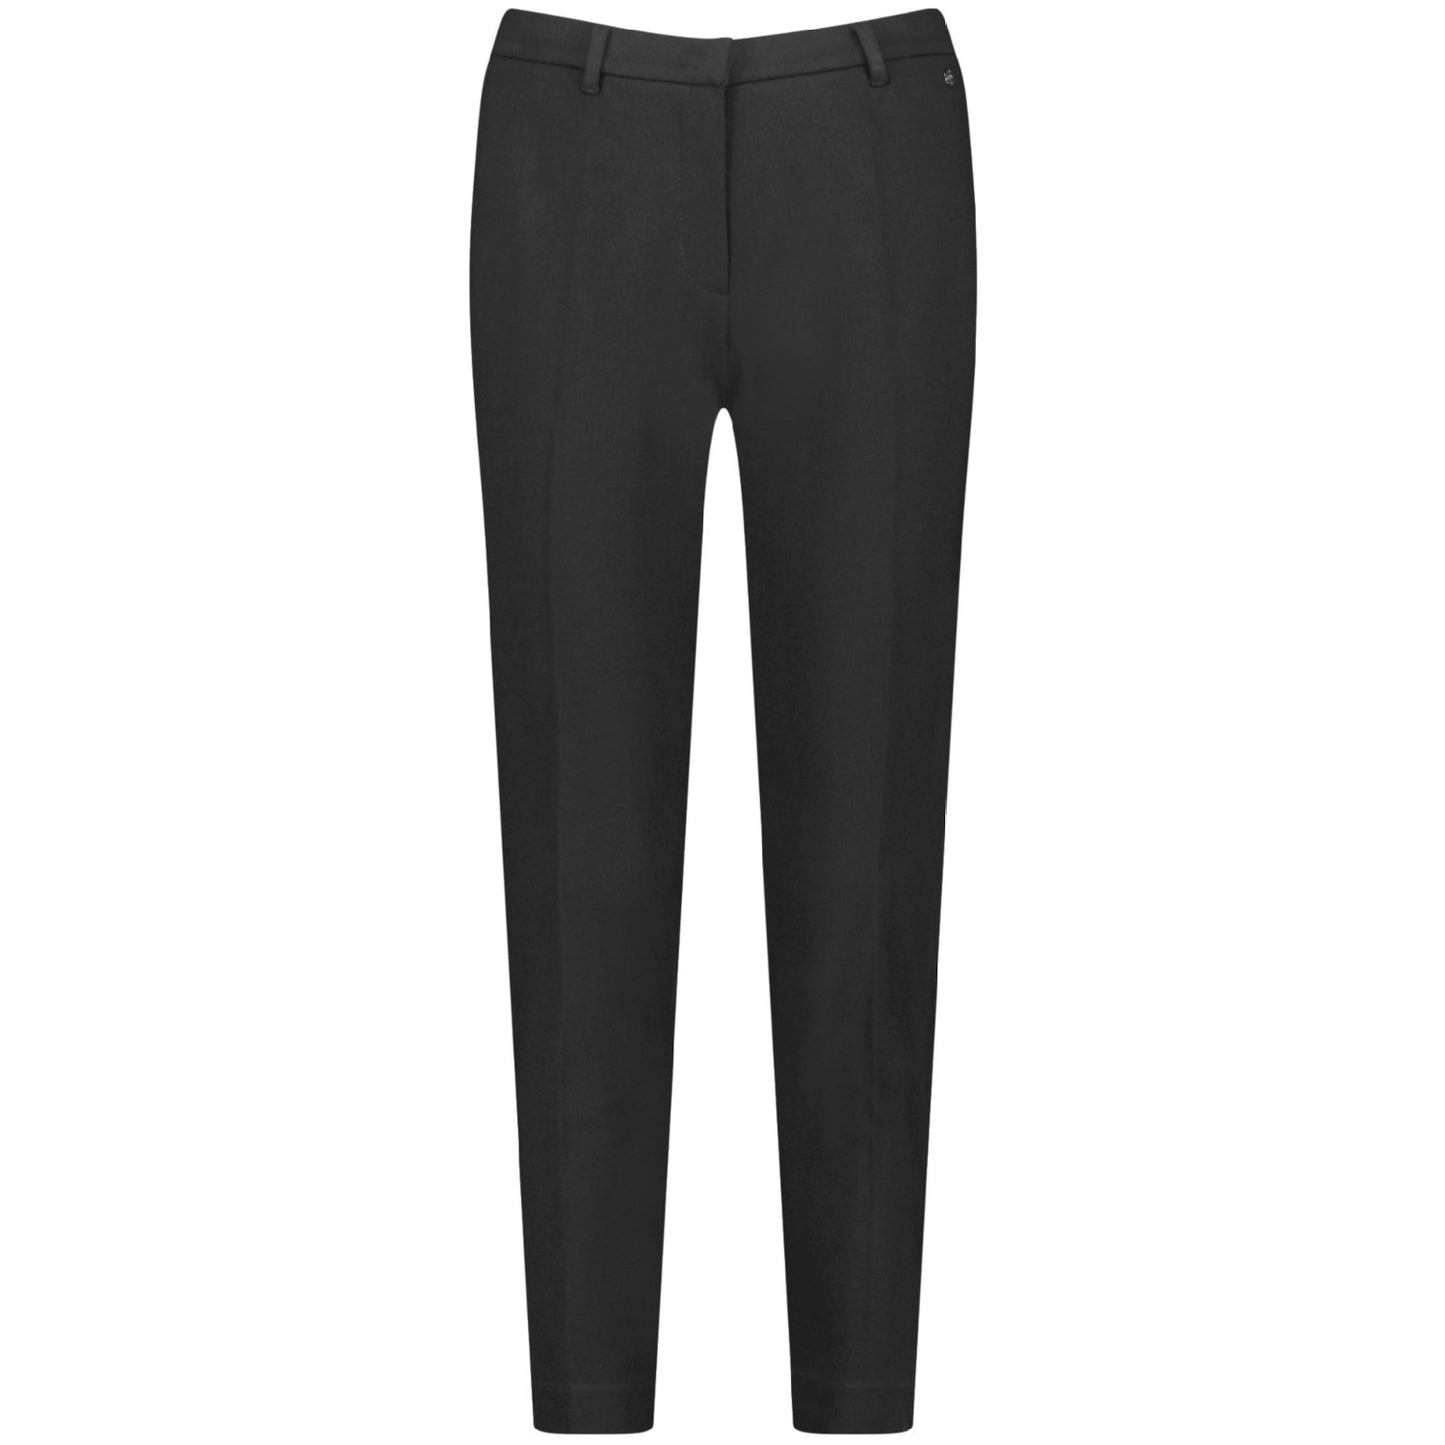 Gerry Weber 722036 66311 11000 Black Cropped Leisure Trousers